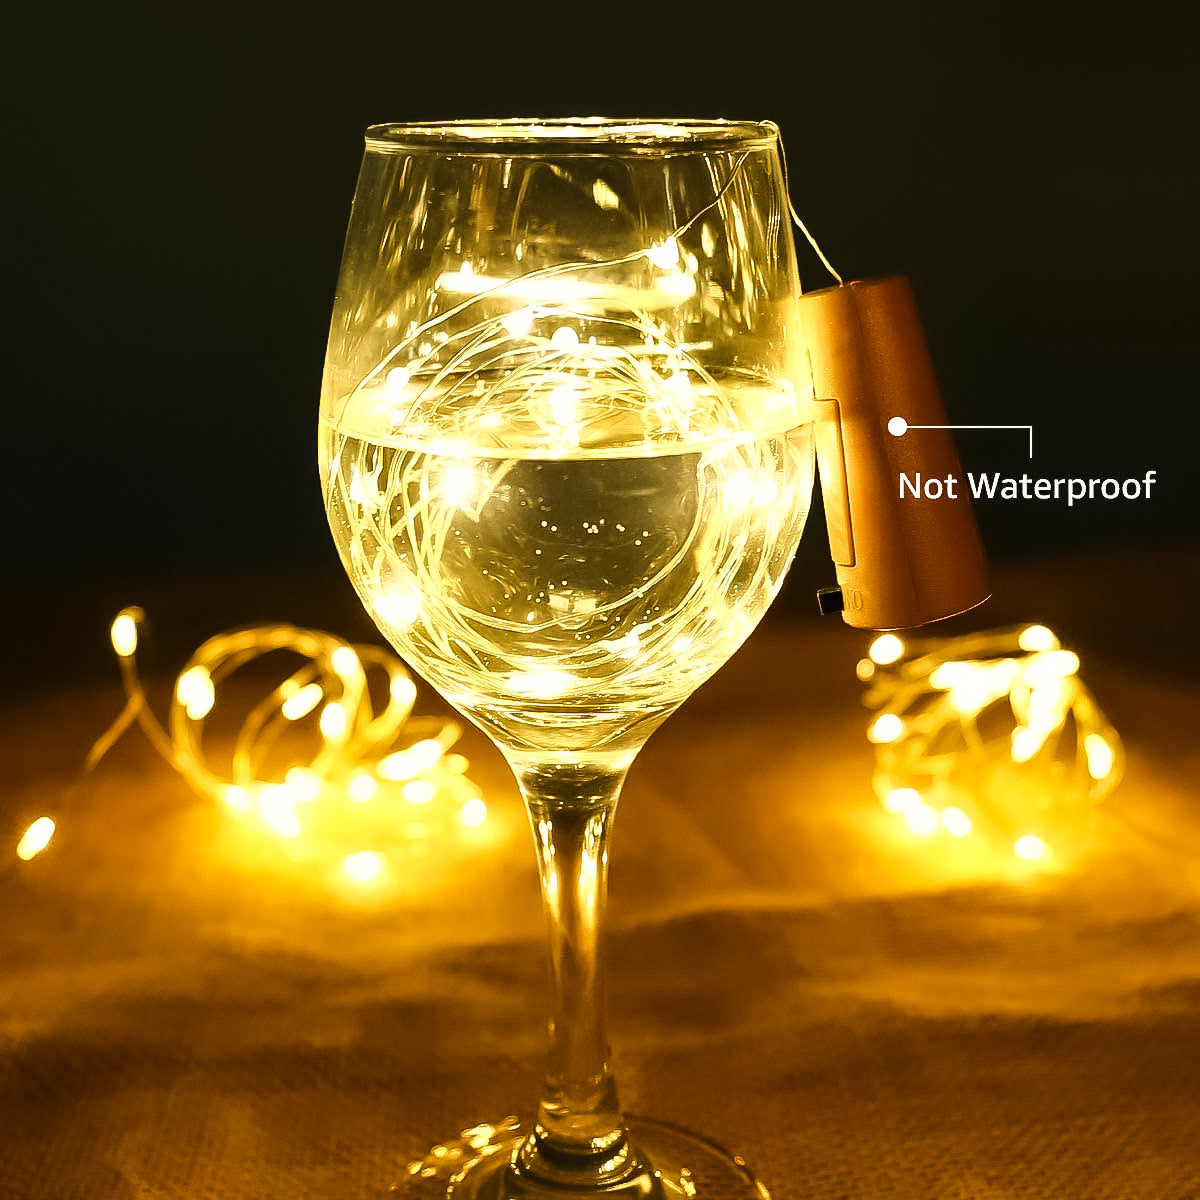 LE Wine Bottle Lights with Cork, 6.6ft 20 LED Battery Operated String Lights.